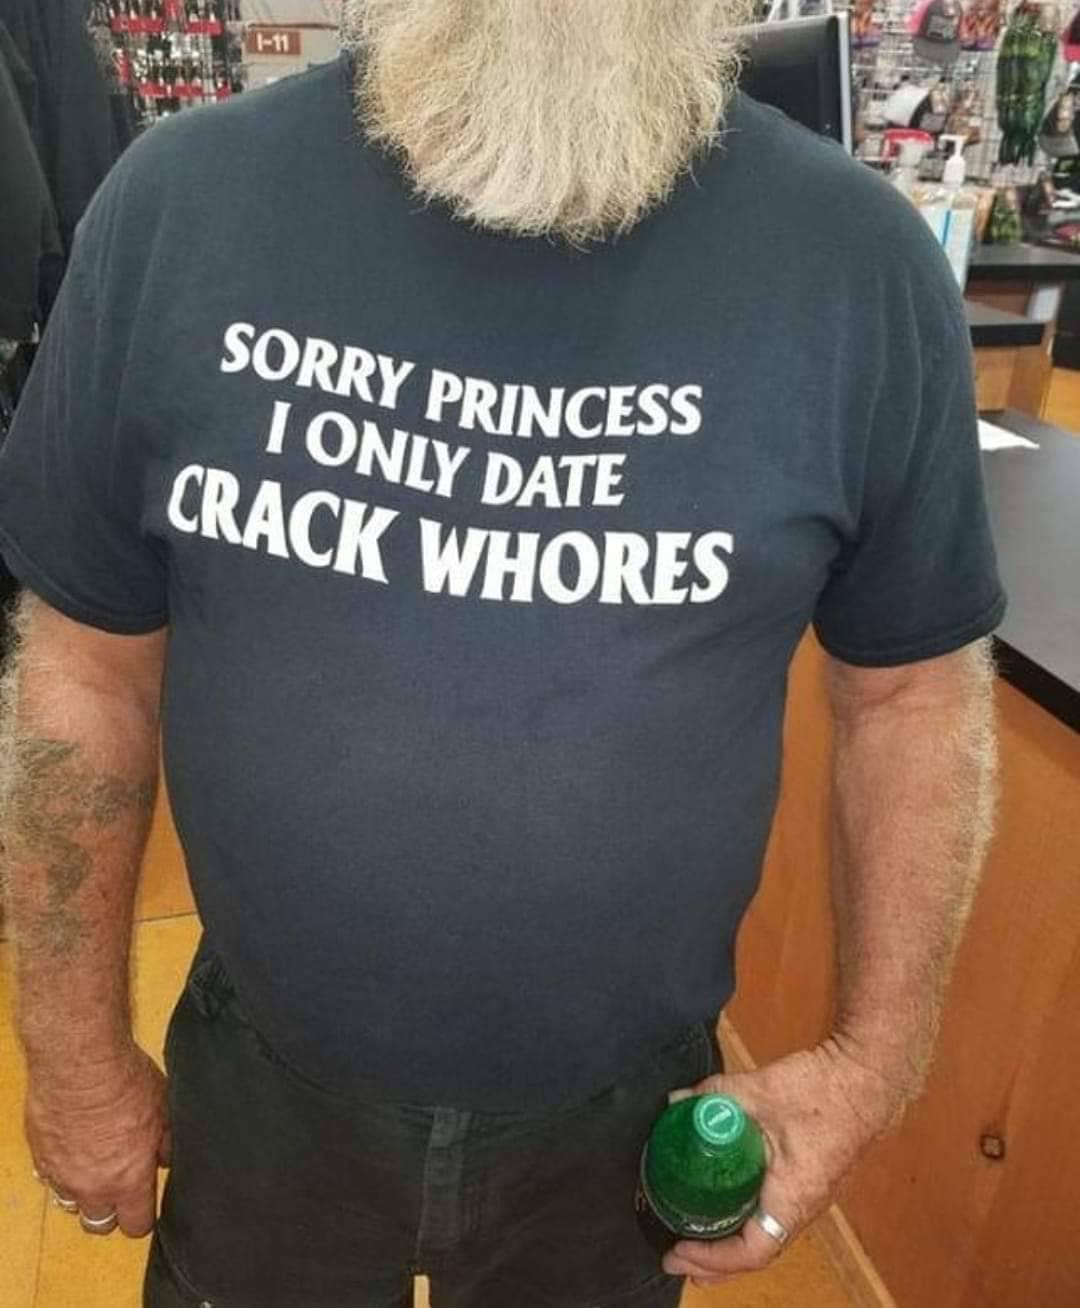 sorry princess i only date crack whores - 111 Sorry Princess I Only Date Crack Whores